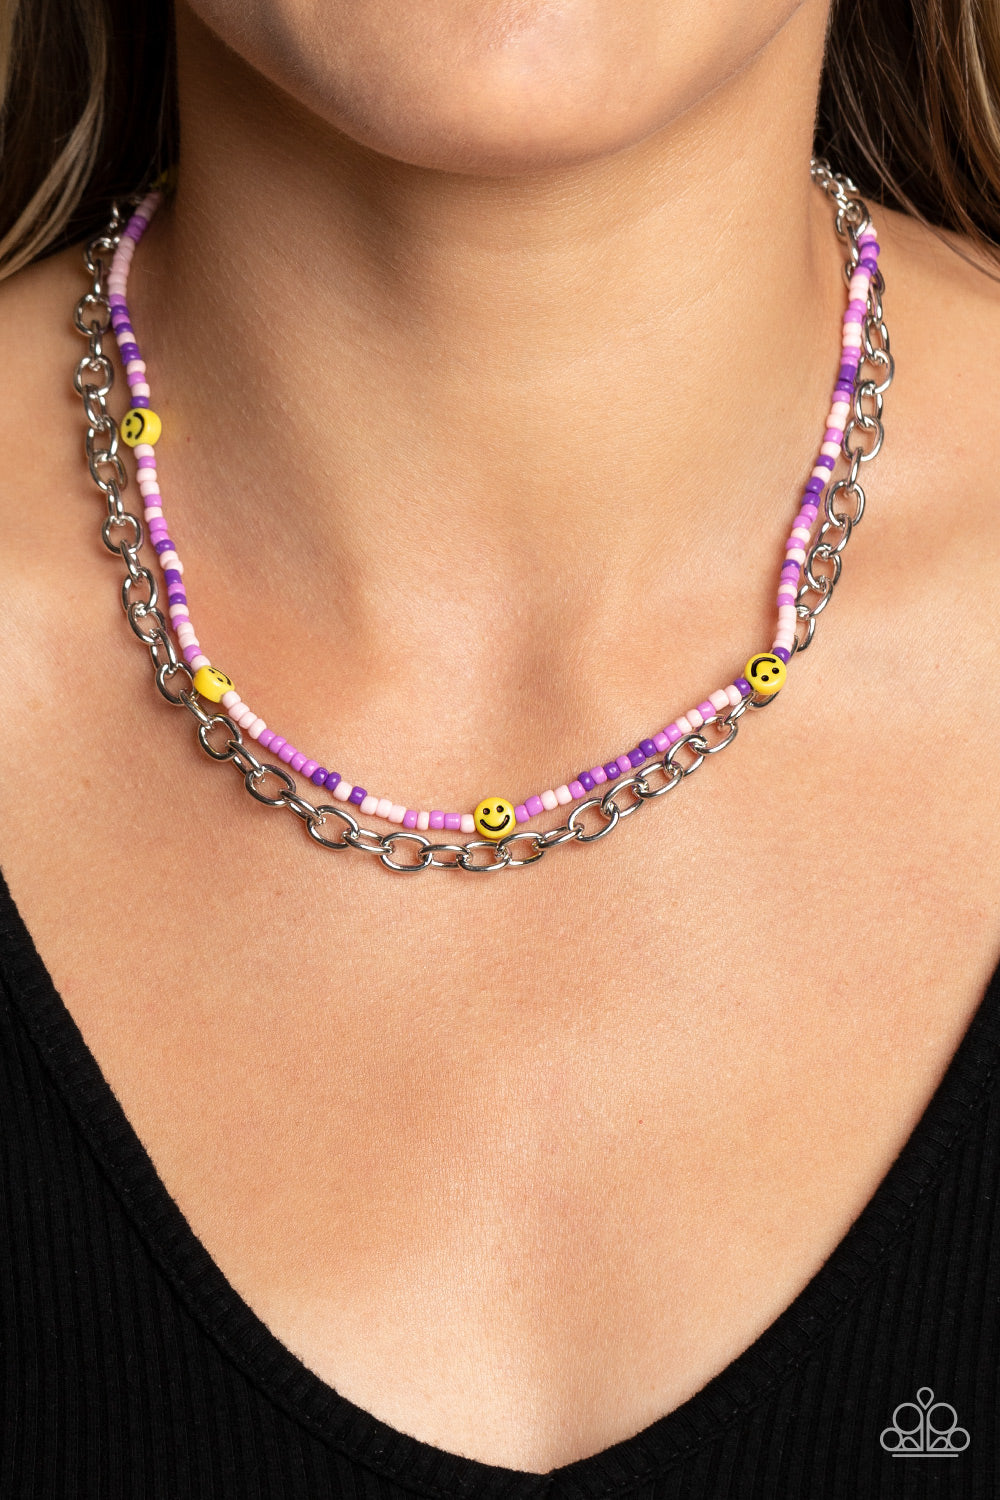 Paparazzi Accessories: Happy Looks Good on You - Purple Inspirational Necklace